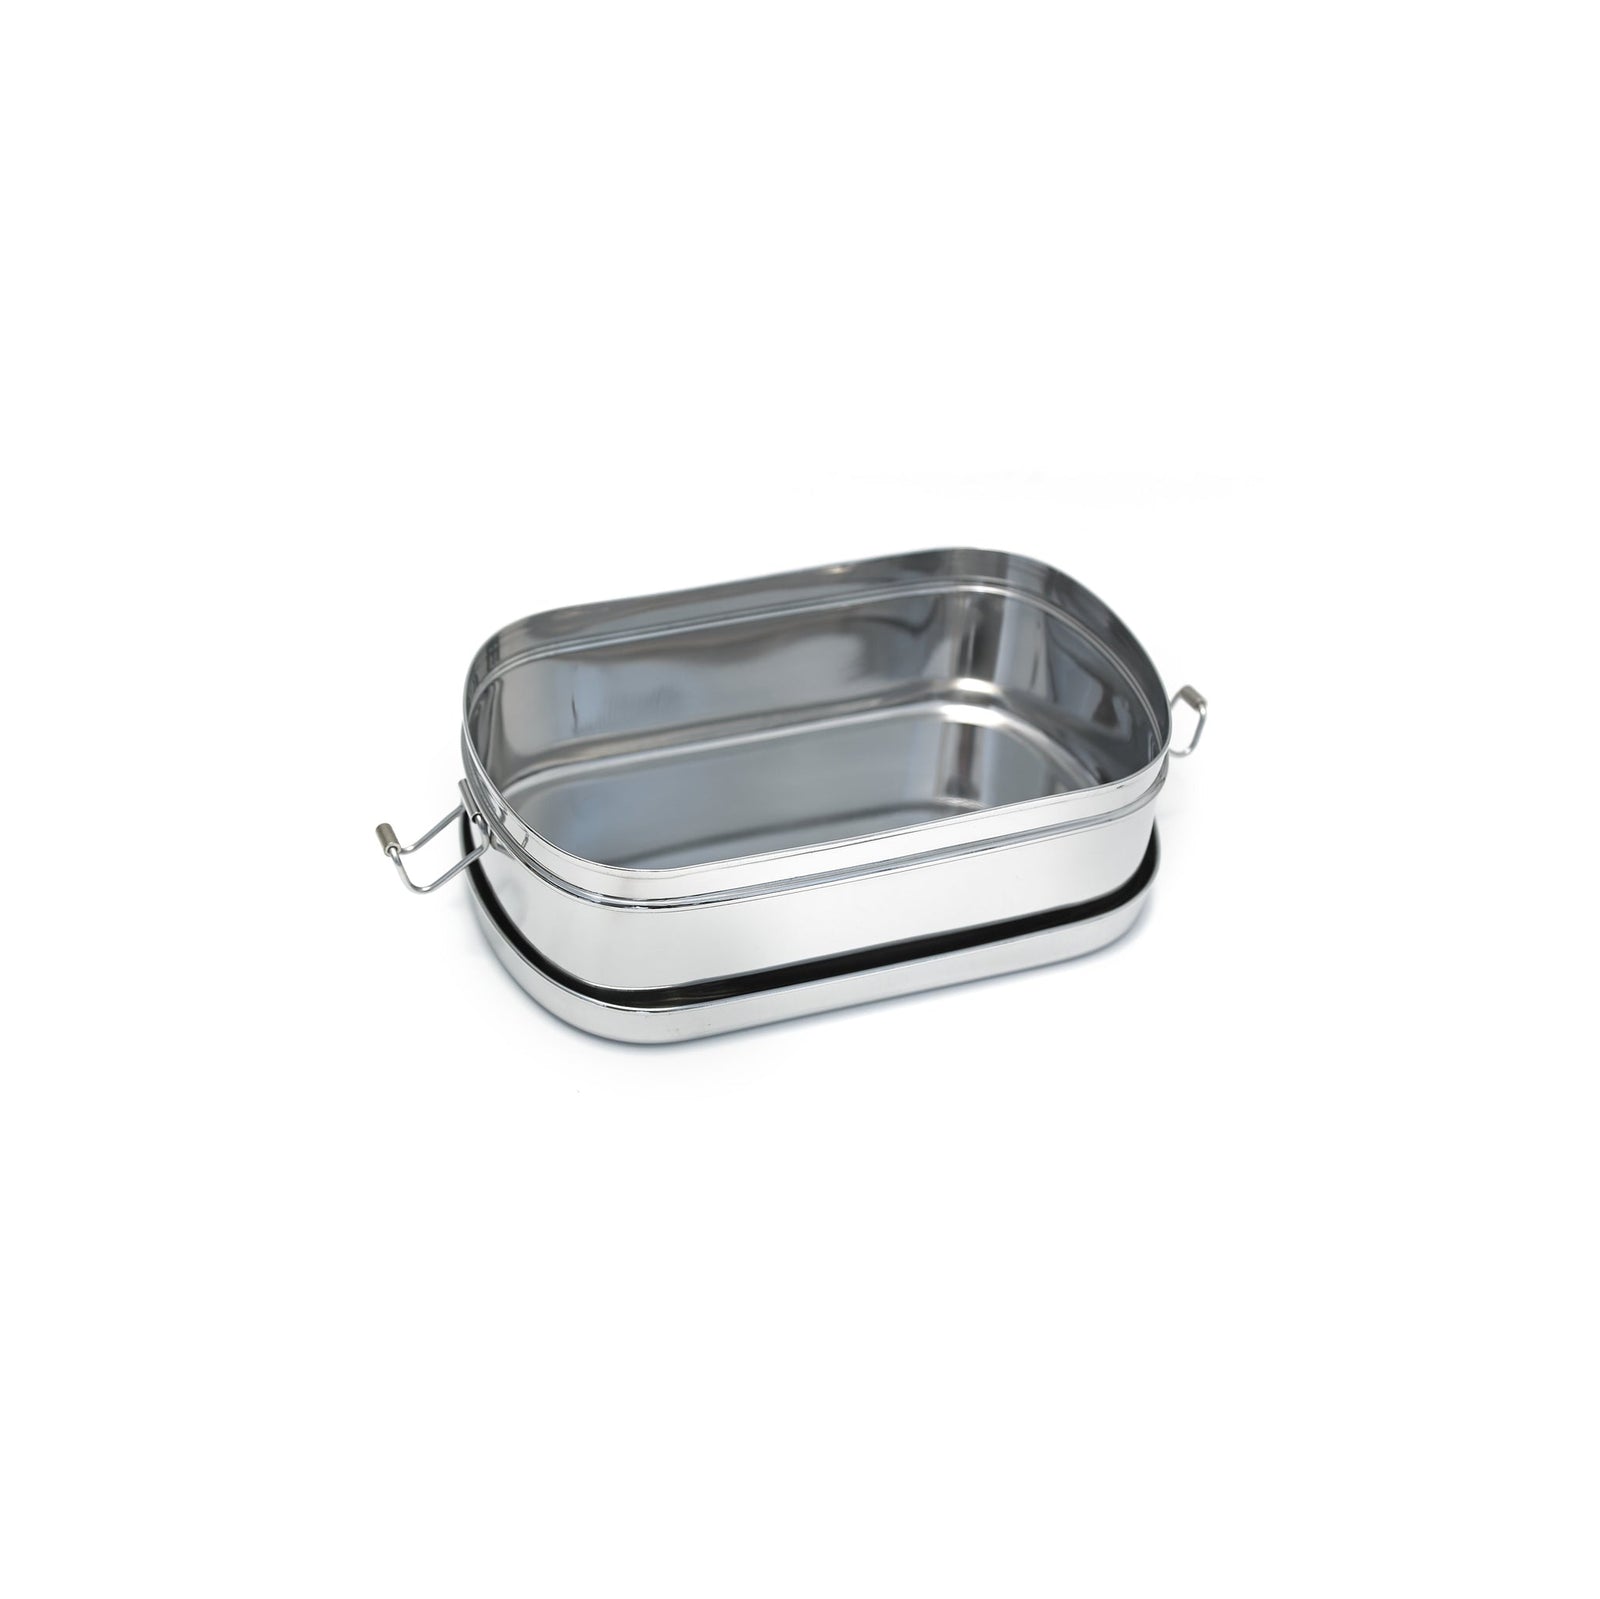 large-oval-lunchbox-896441_1024x1024@2x